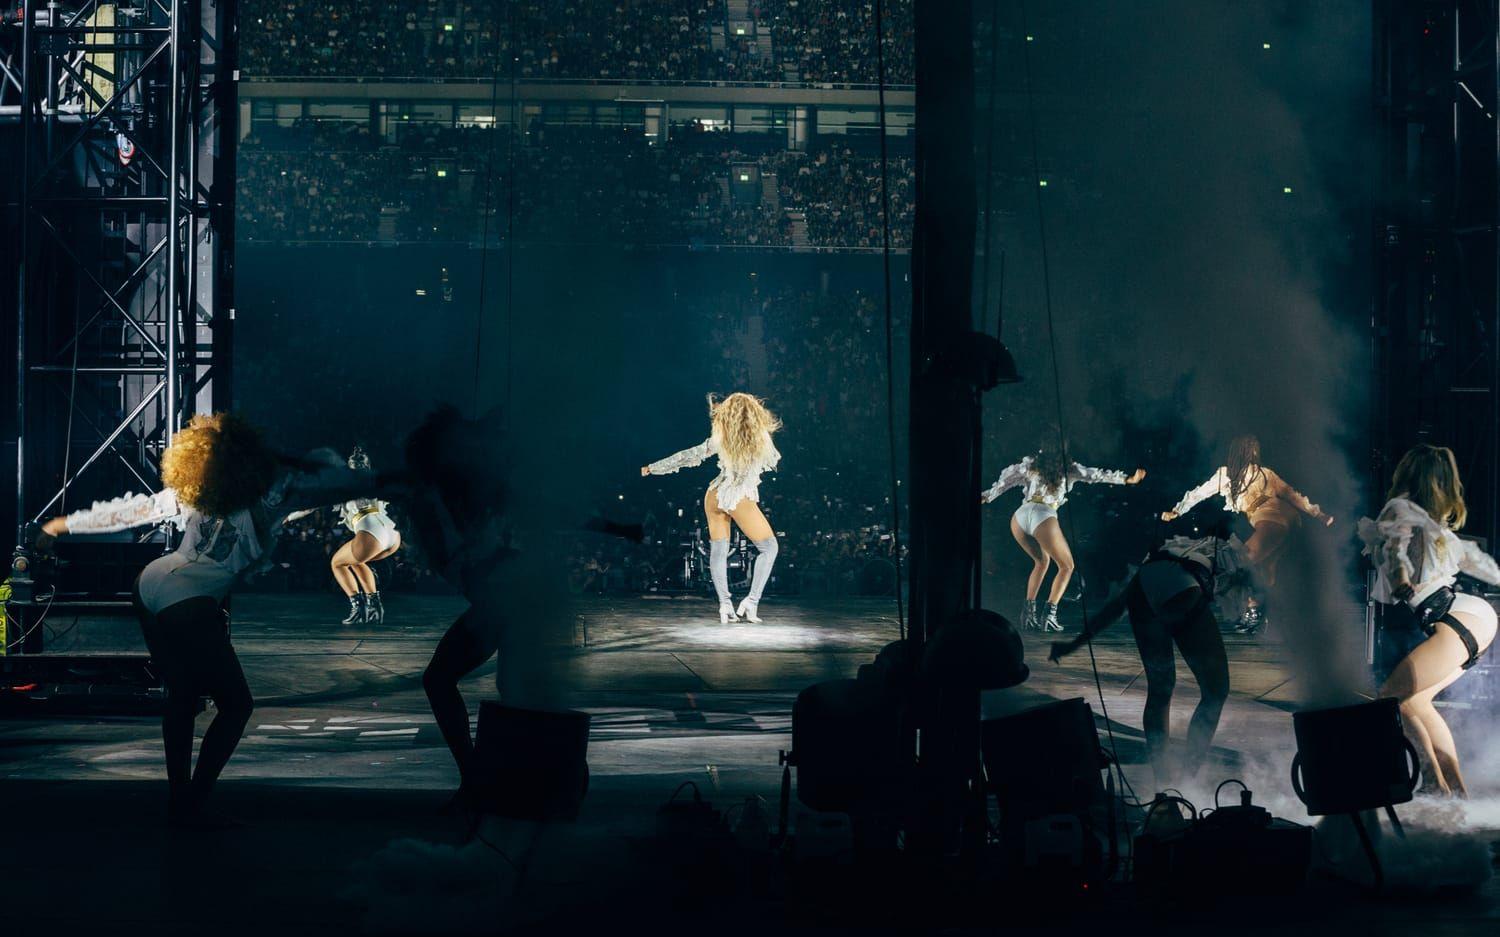 World Formation Tour på Friends arena. Foto: Andrew White/Invision for Parkwood Entertainment/AP Images.